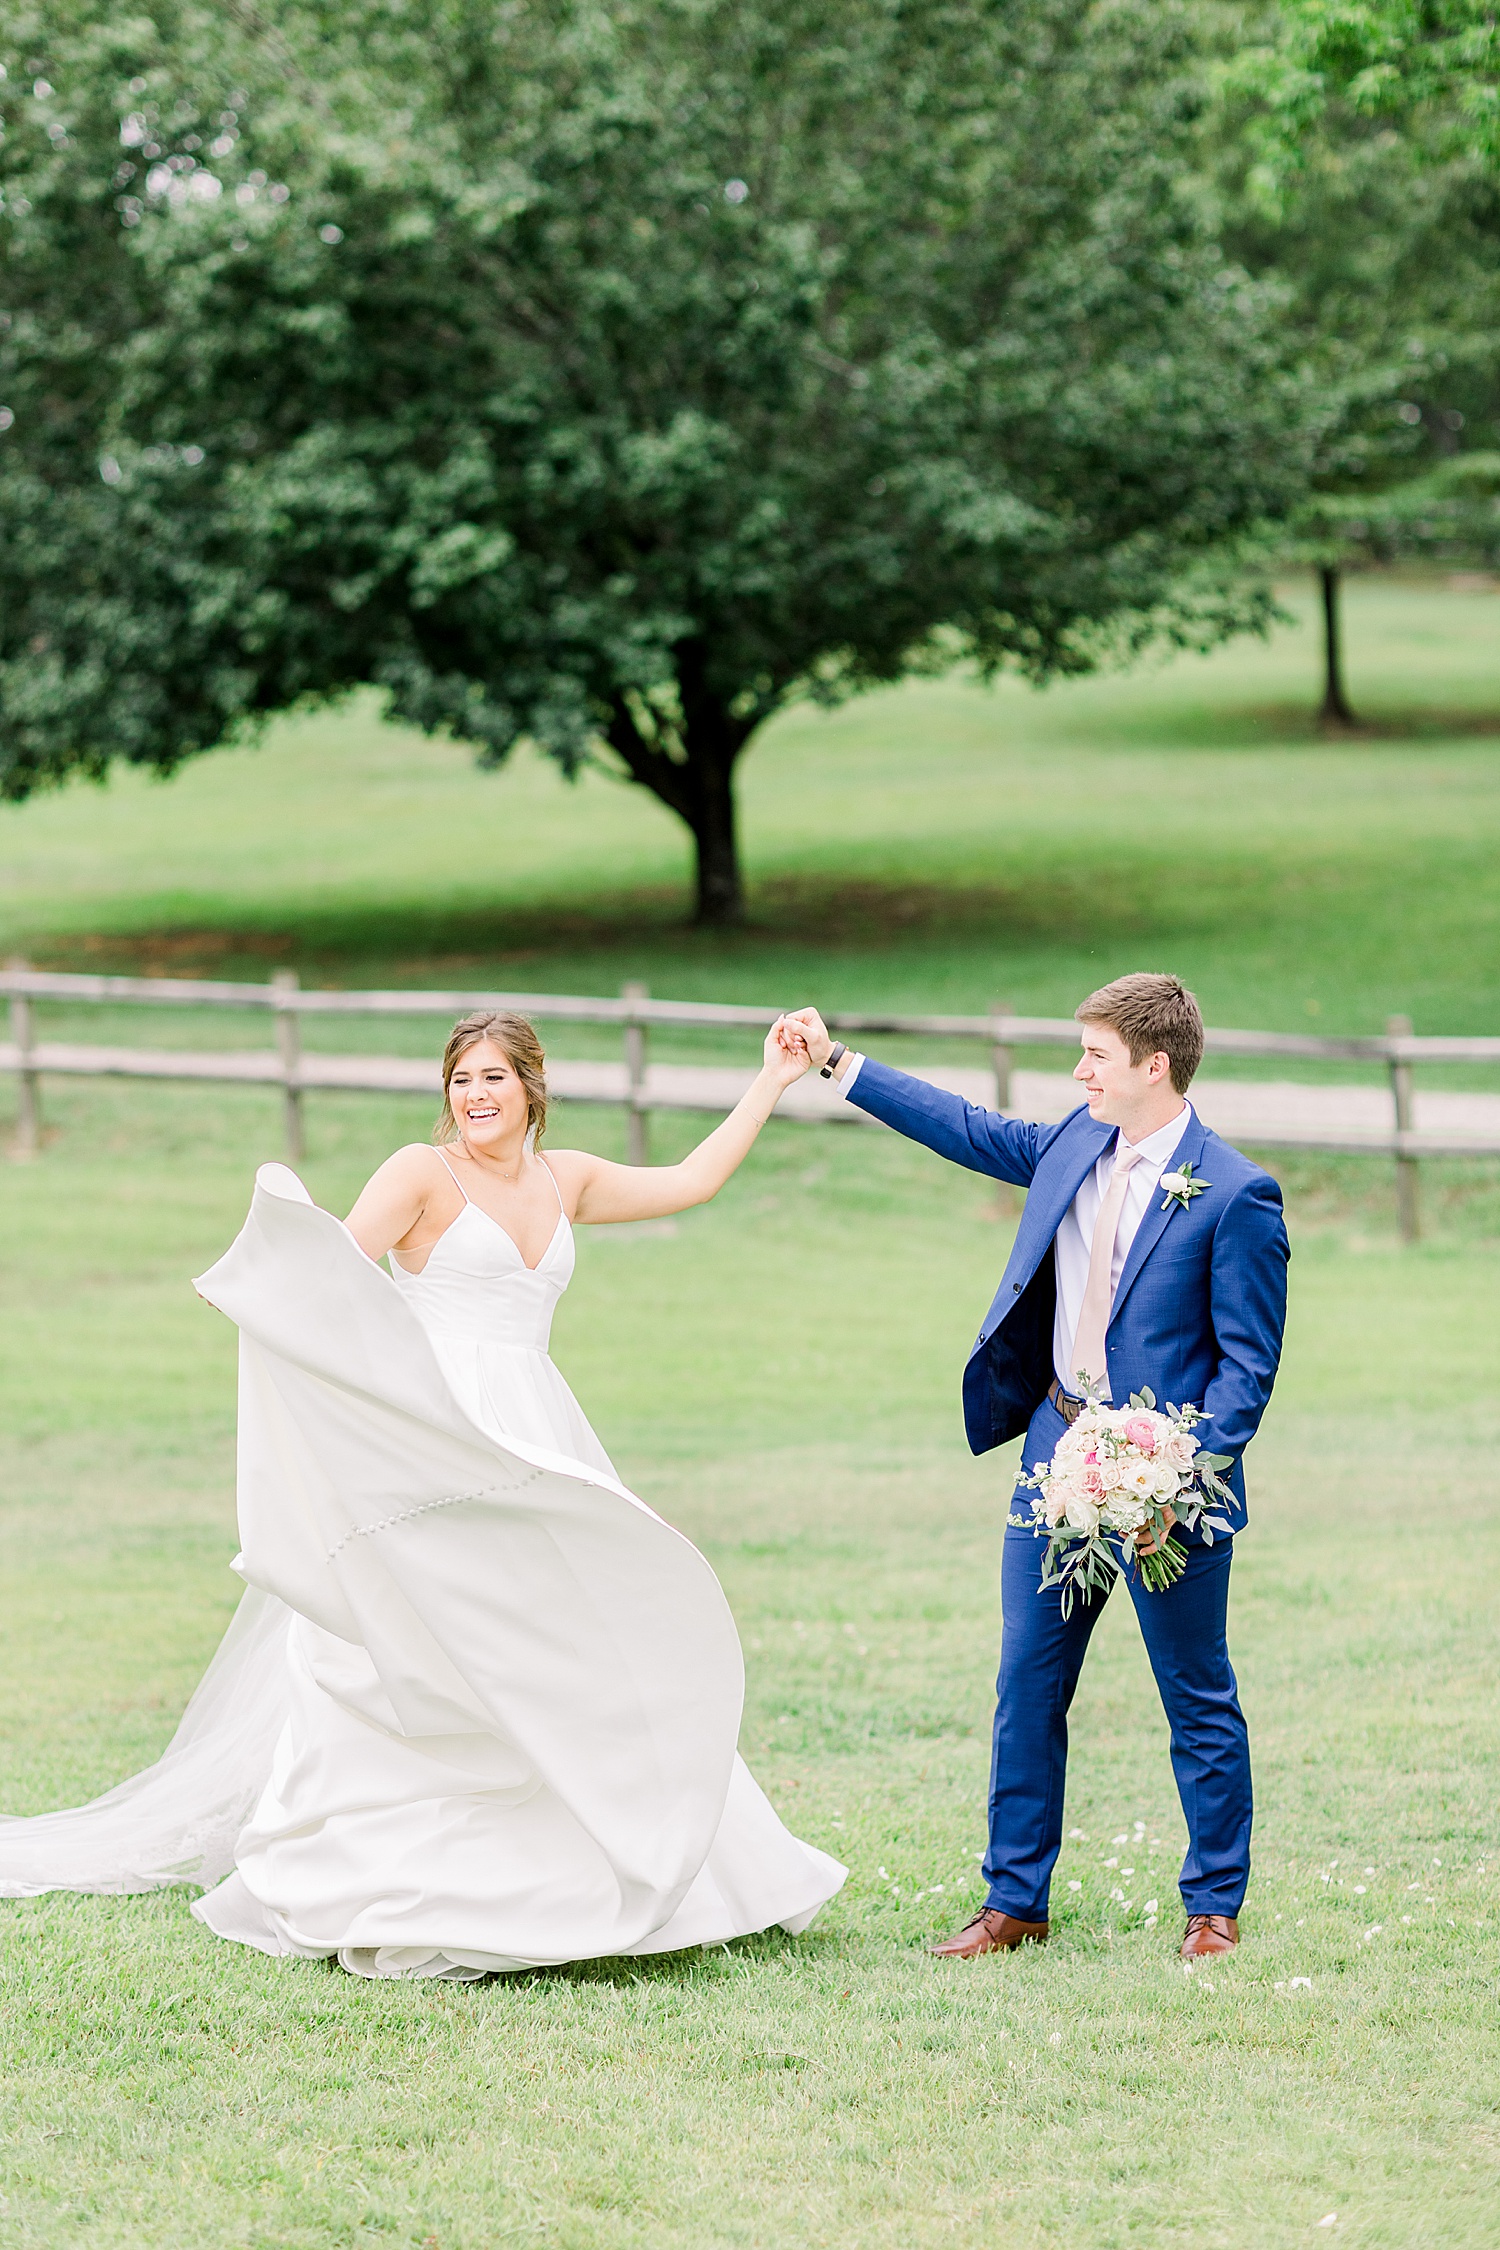 Husband and wife dance + Celebrate on the grounds of The Barn at Shady Lane in Birmingham AL